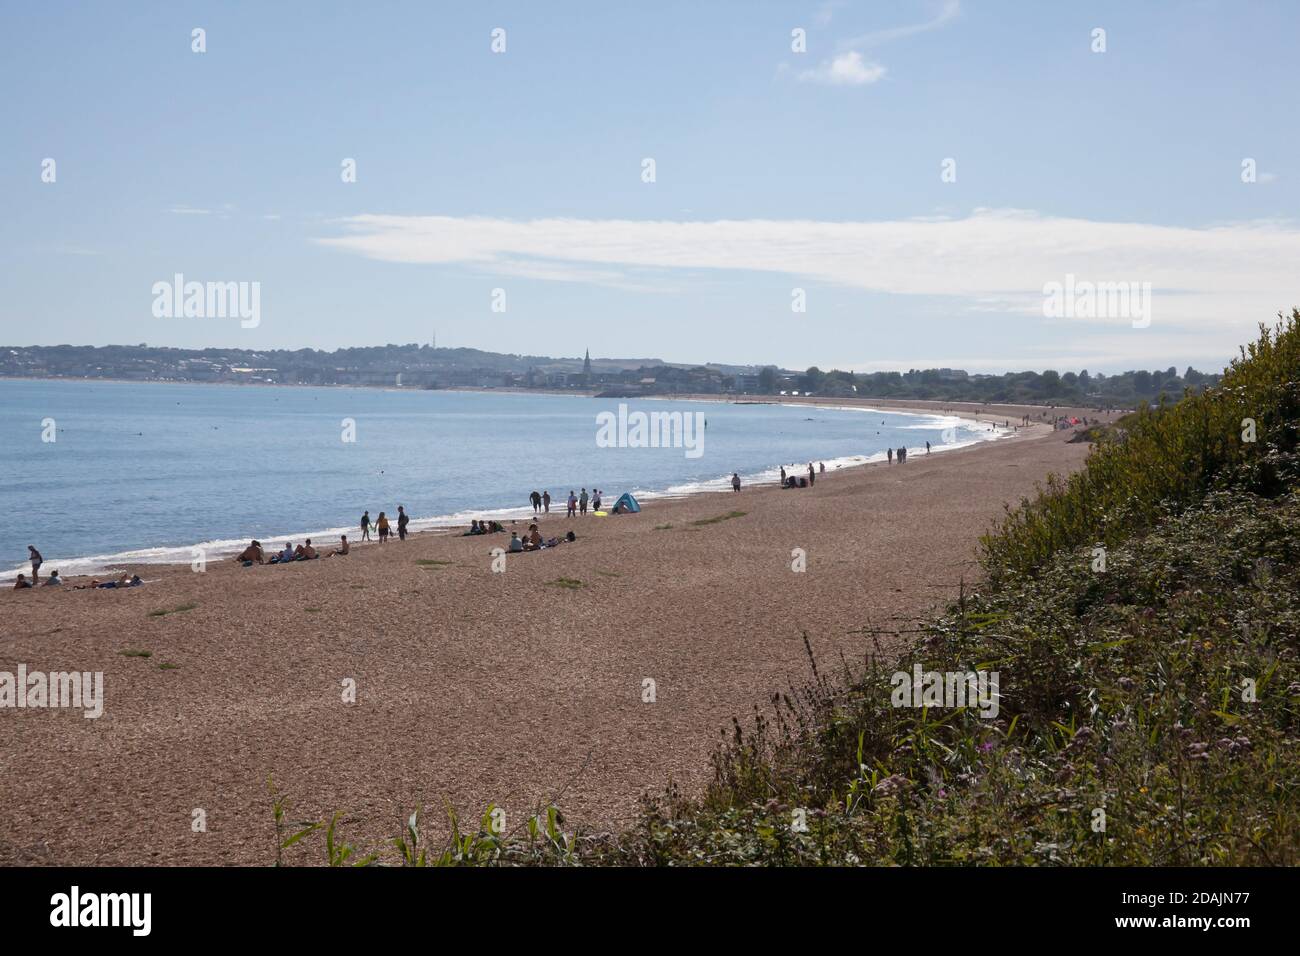 Views of Overcombe Beach near Weymouth, Dorset in the UK, taken on the 3rd of August 2020 Stock Photo